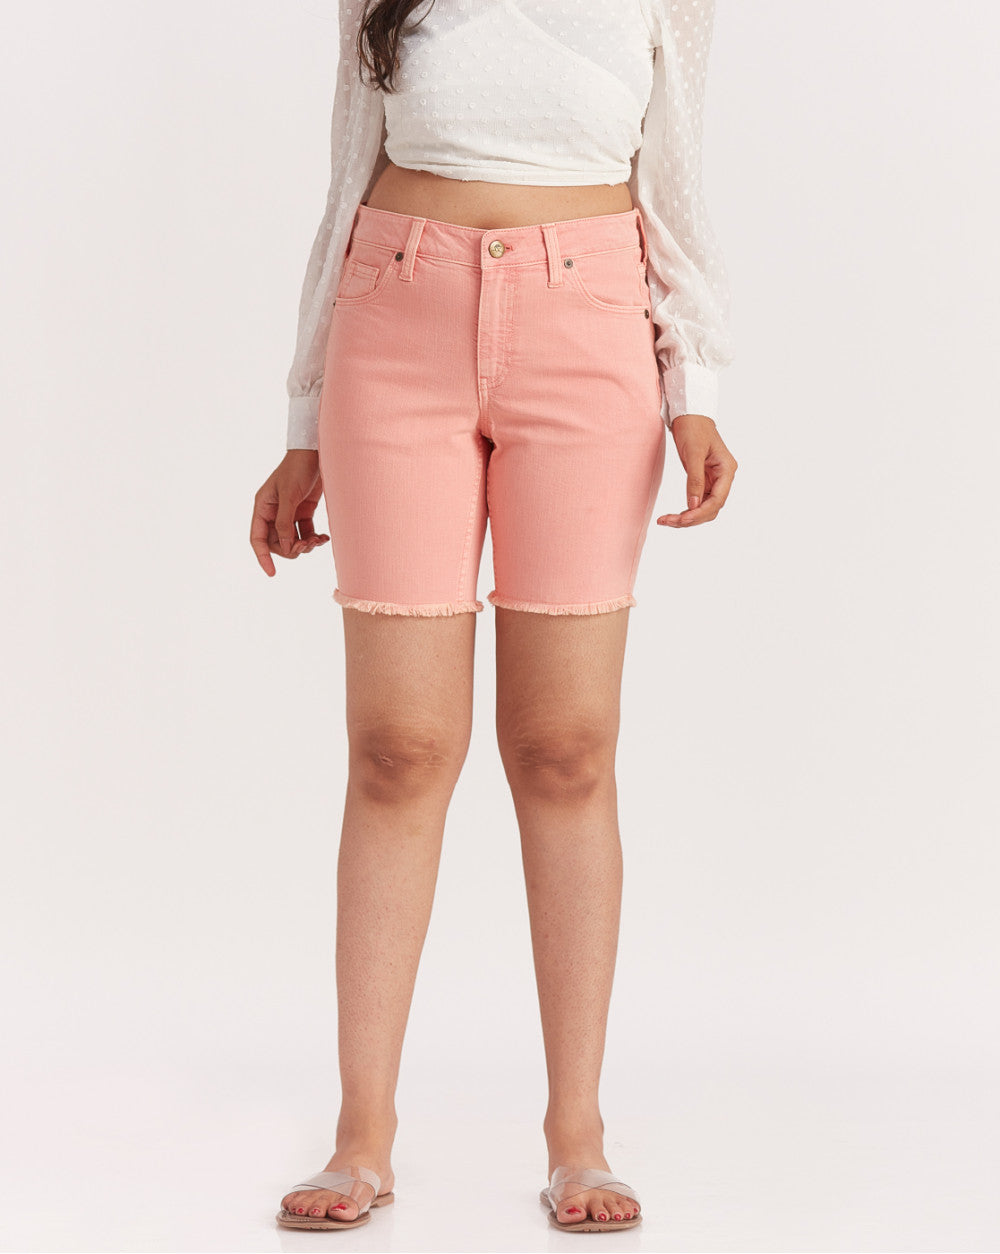 Mid Rise Colored Shorts - Coral